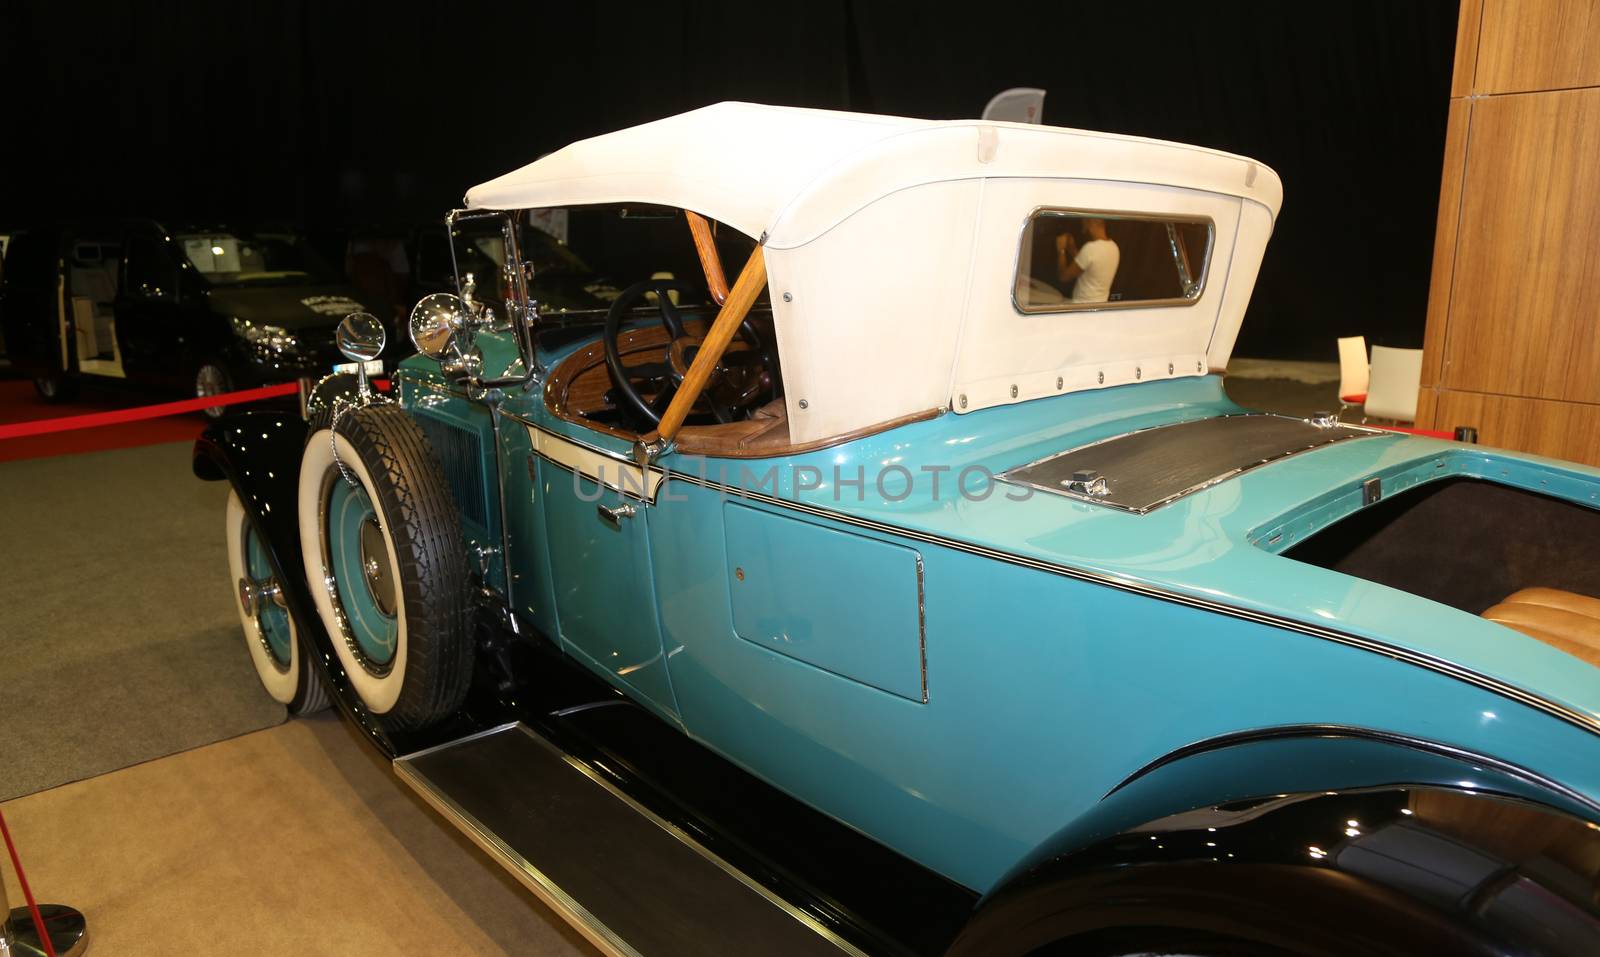 ISTANBUL, TURKEY - SEPTEMBER 12, 2015: An Antique car in Used Cars For Sale Fair in CNX Expo